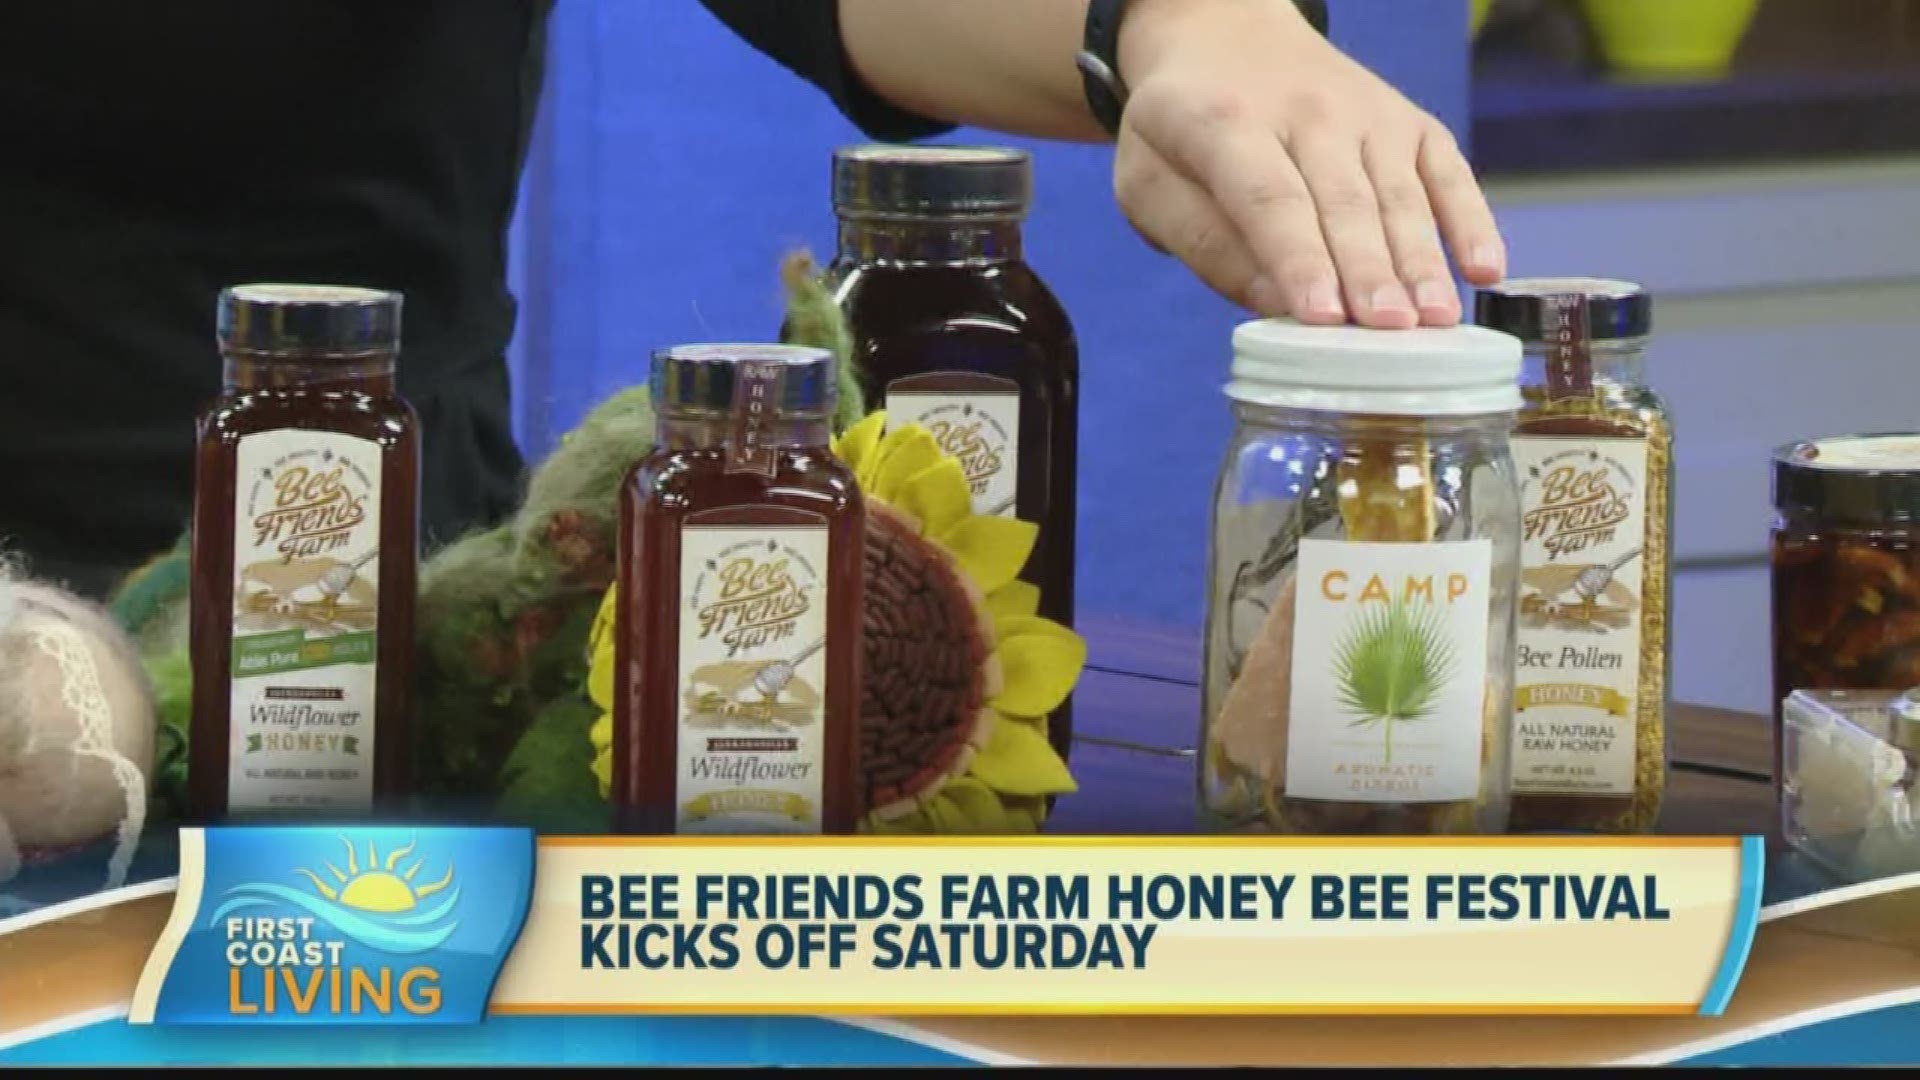 Get ready to 'Bee' happy and have a good time at the Honey Bee Festival.